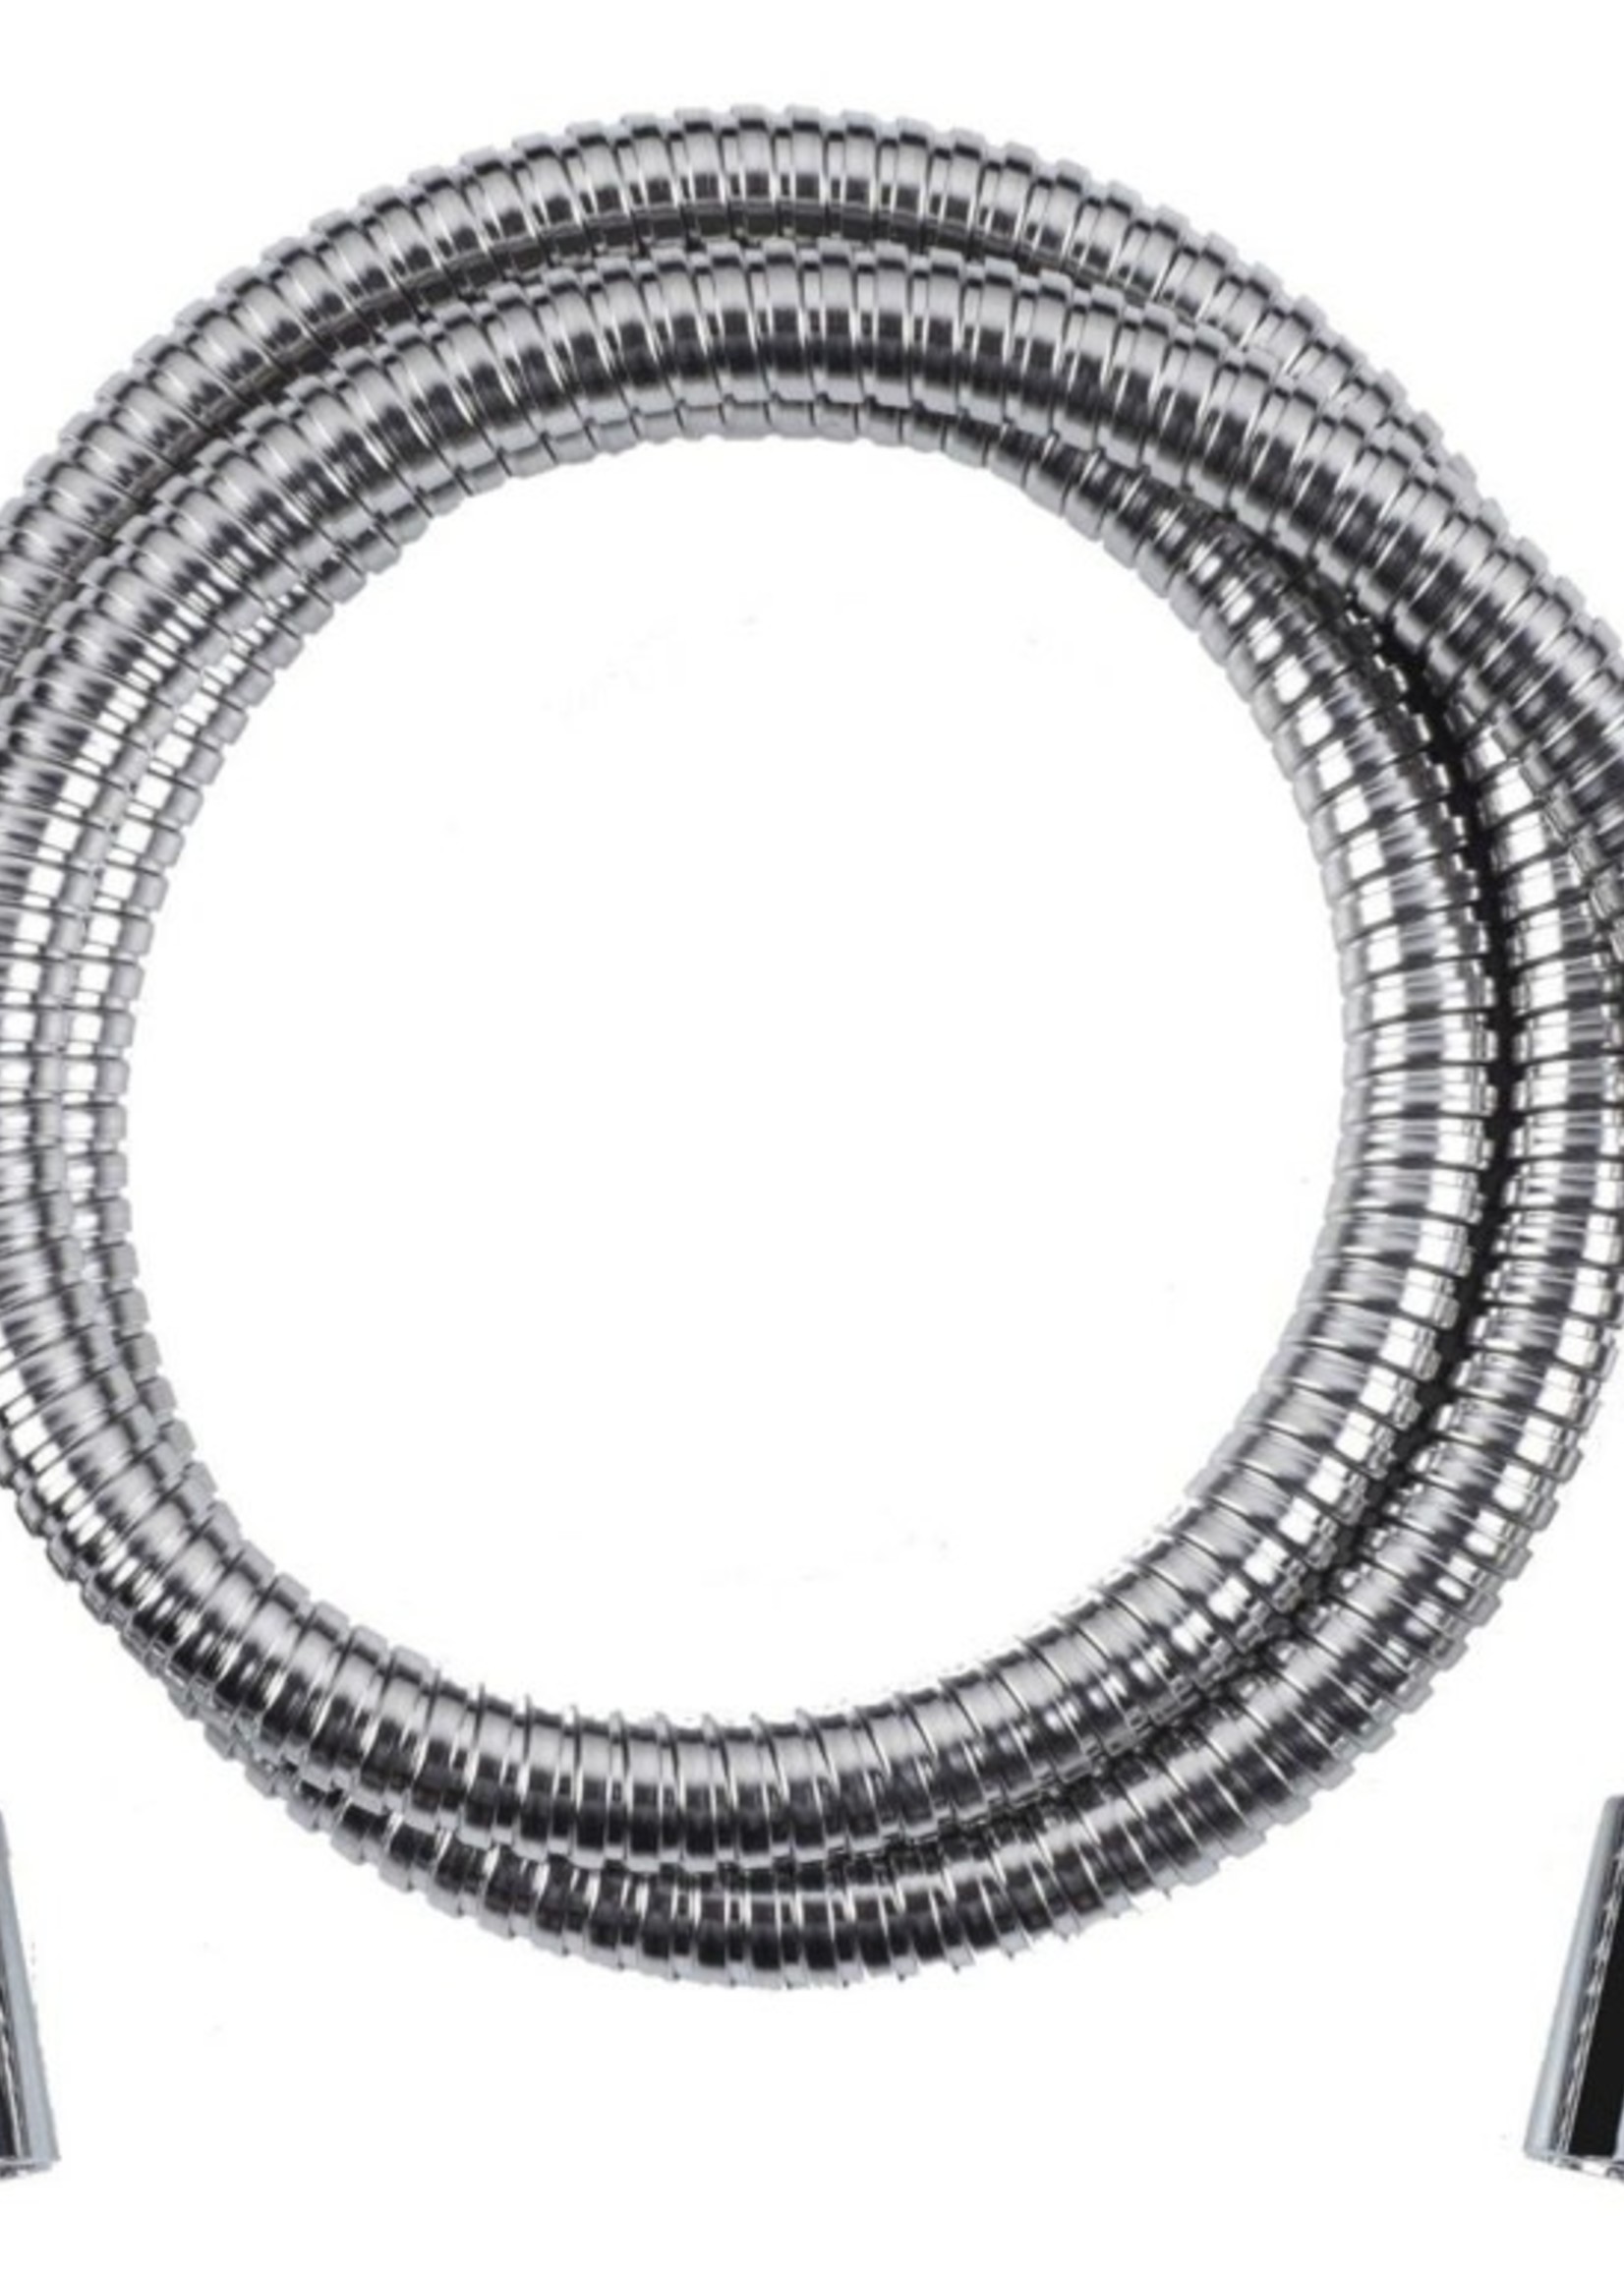 Blue Canyon Blue Canyon Fremont Shower Hose 1.75m - Stainless Steel